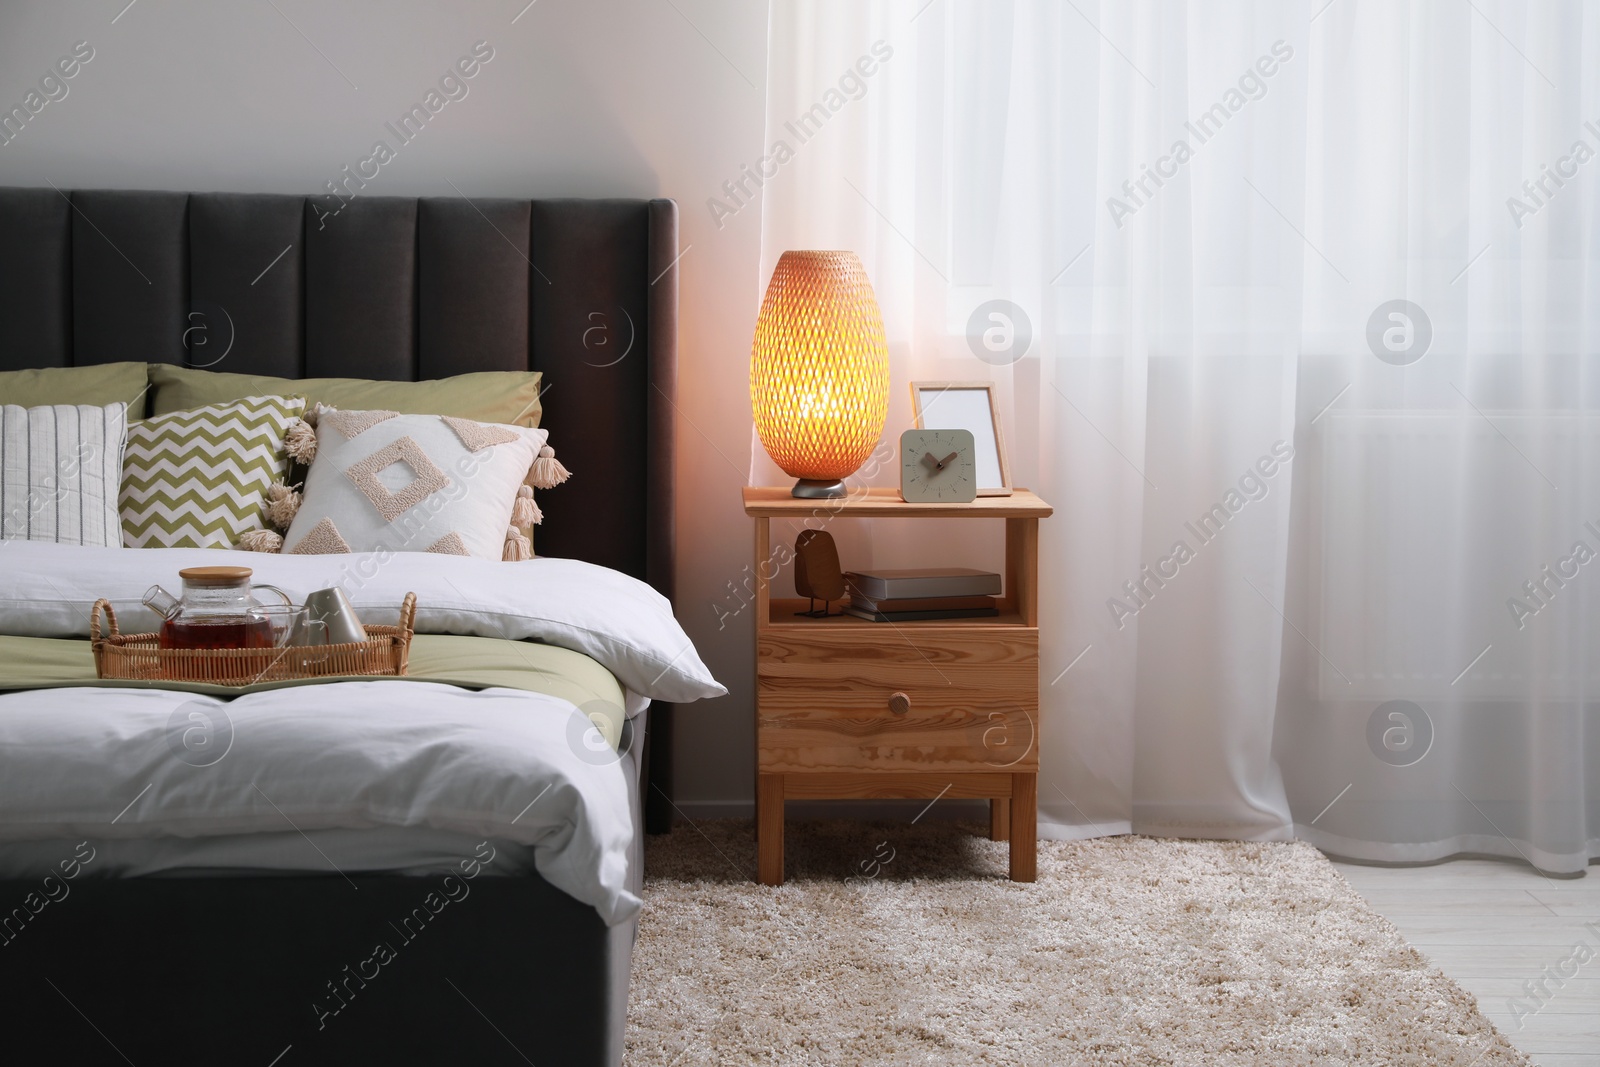 Photo of Wicker tray with teapot on comfortable bed, lamp and different decor on wooden bedside table in room. Stylish interior